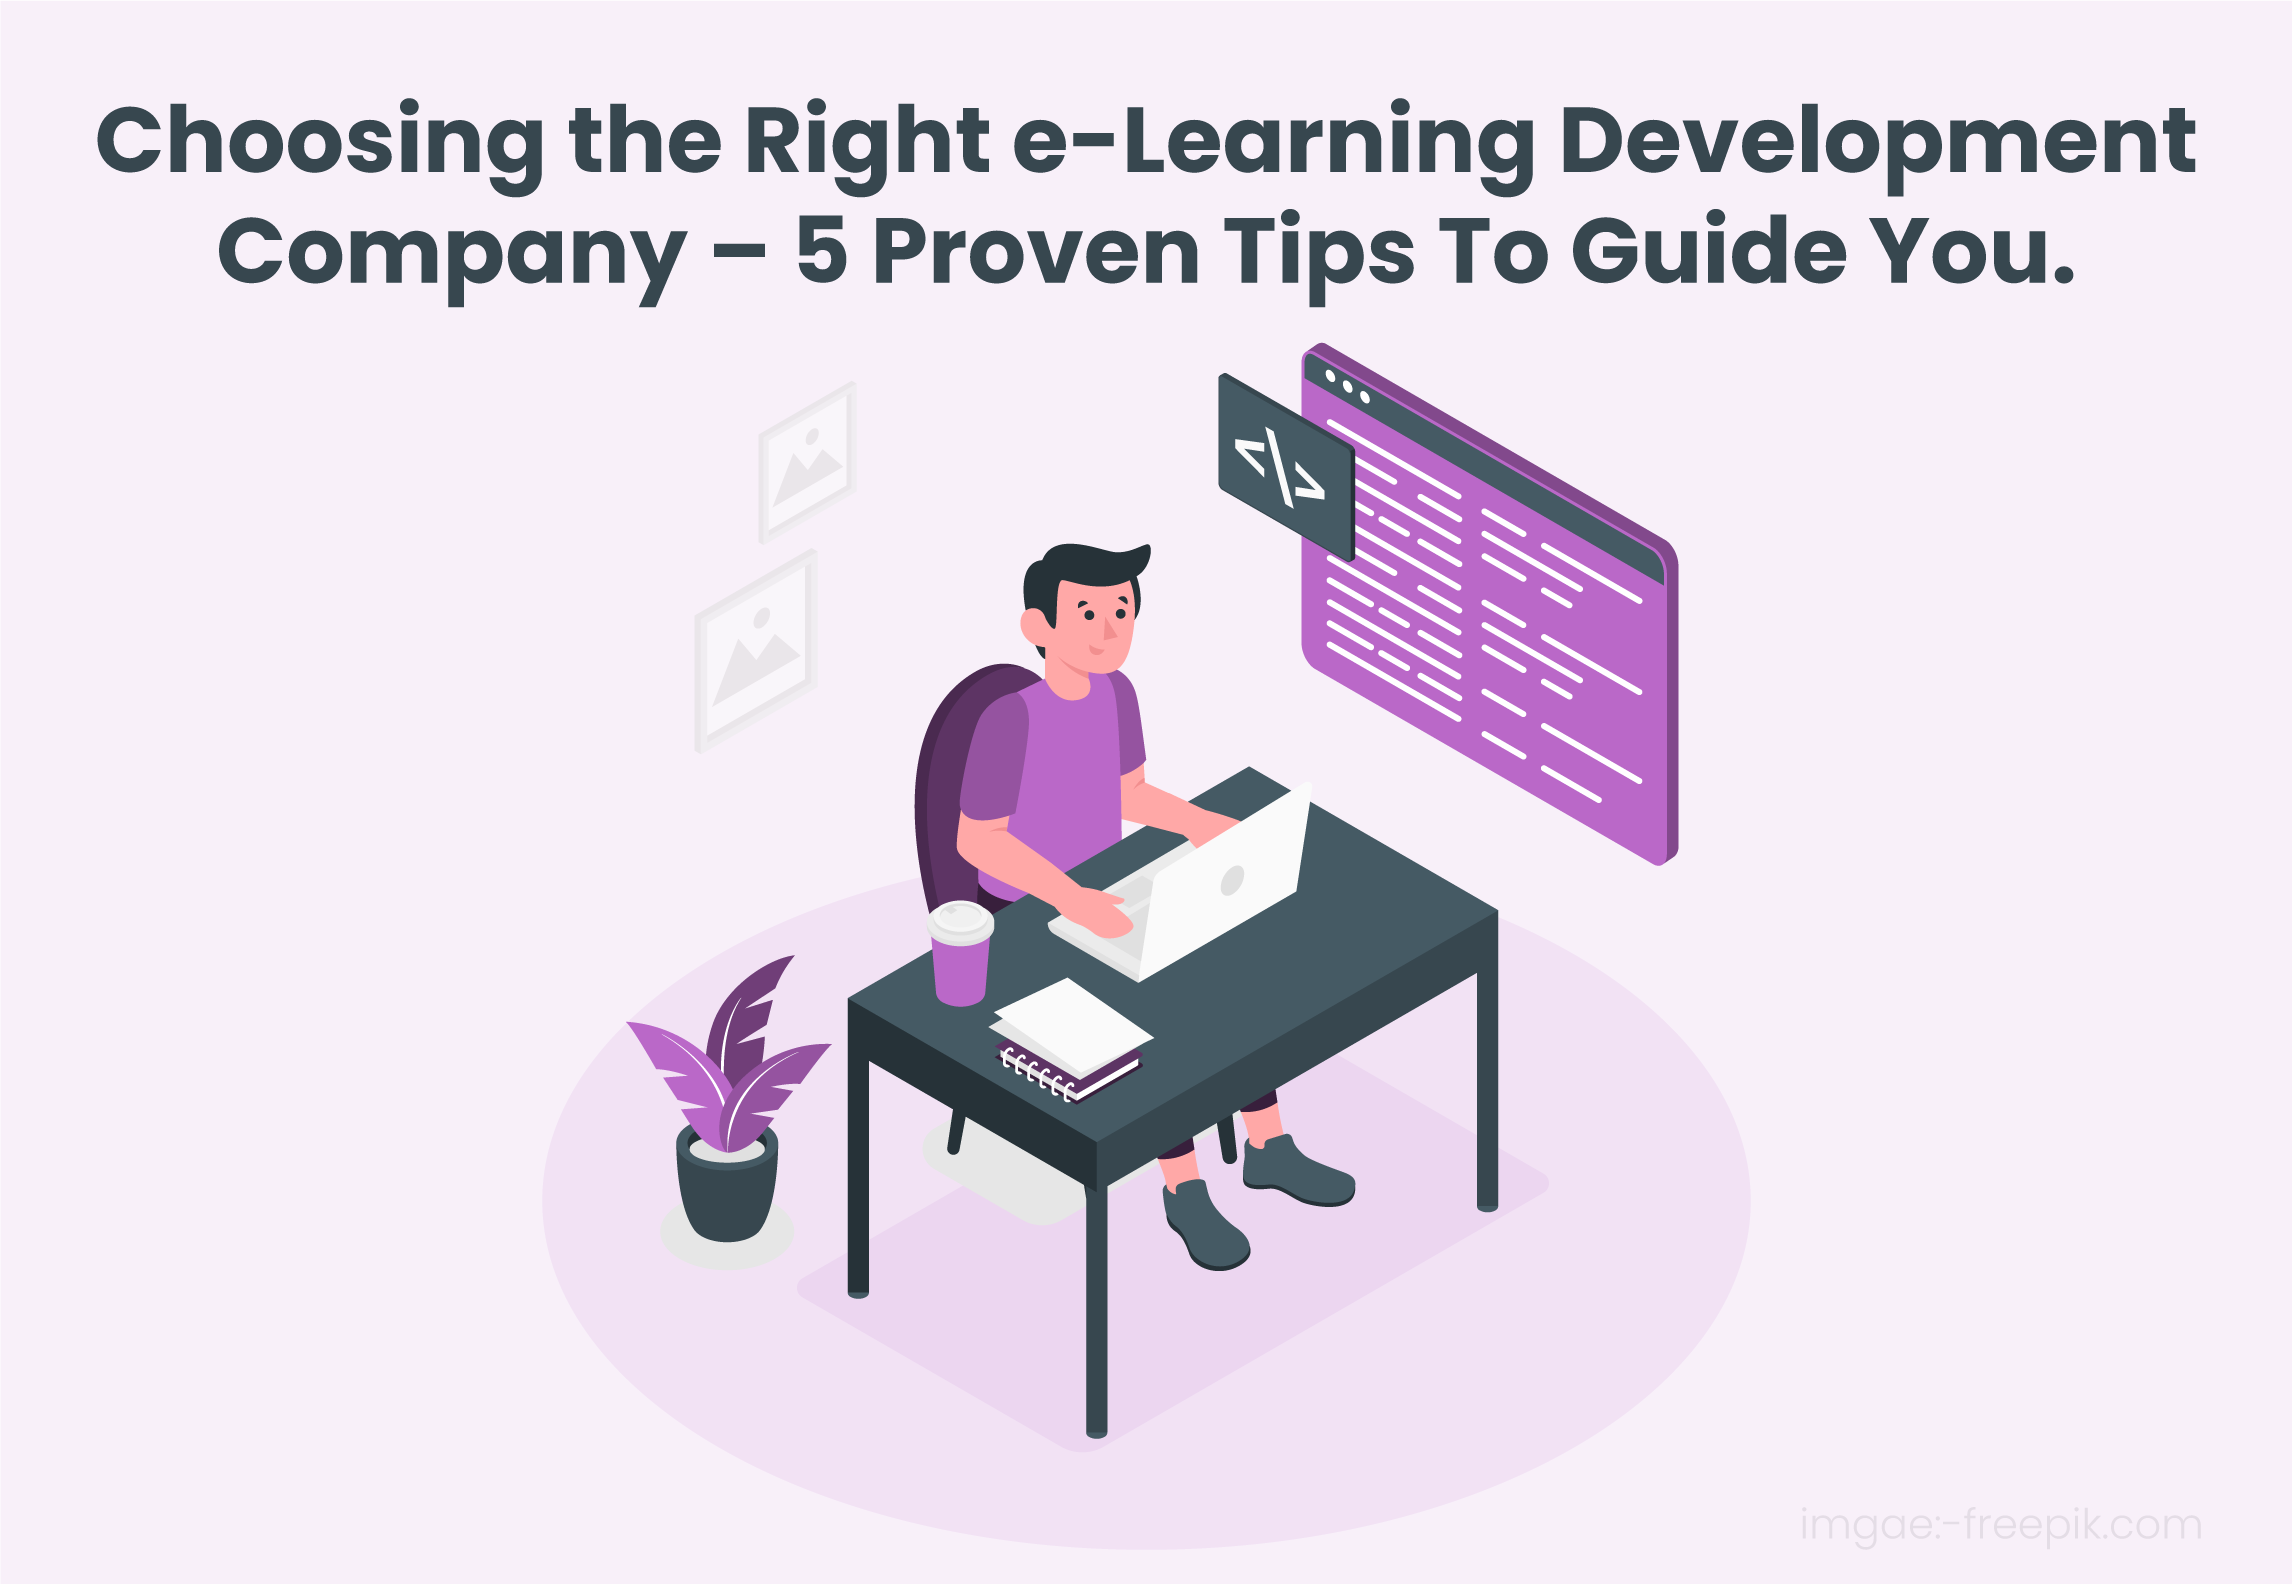 5 Proven Tips for Choosing the Right E-learning Development Company